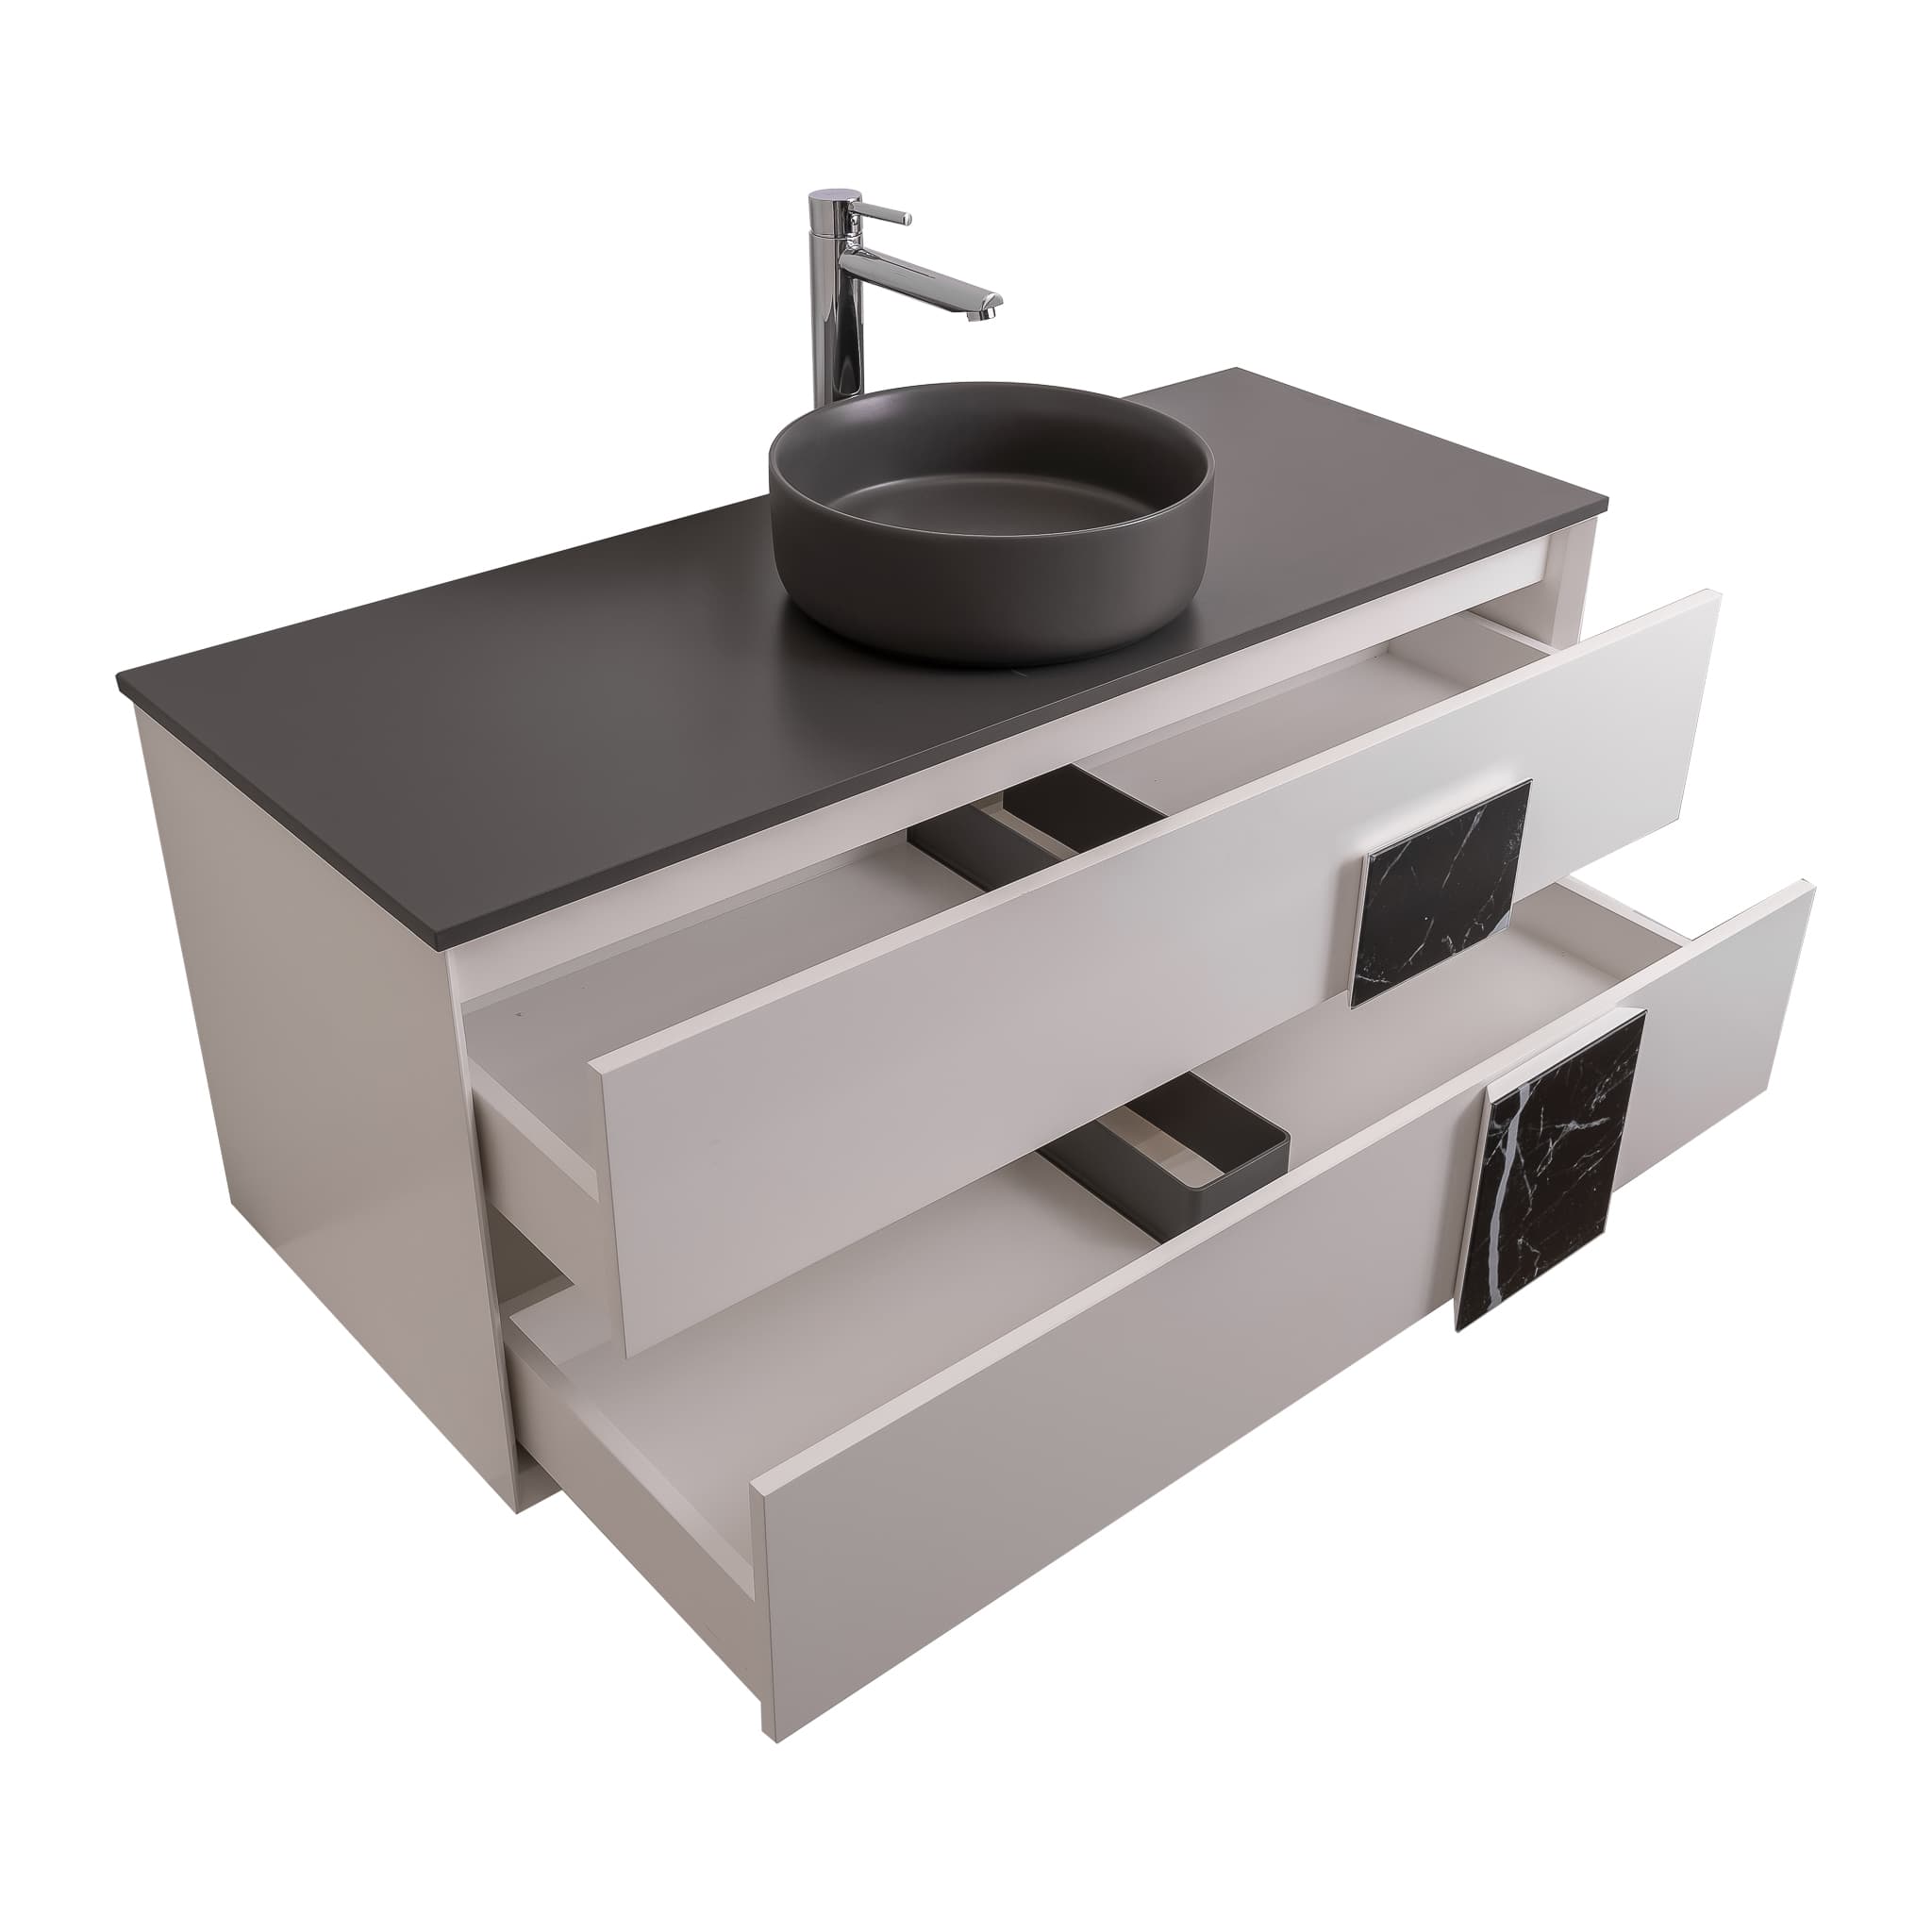 Piazza 47.5 Matte White With Black Marble Handle Cabinet, Ares Grey Ceniza Top and Ares Grey Ceniza Ceramic Basin, Wall Mounted Modern Vanity Set